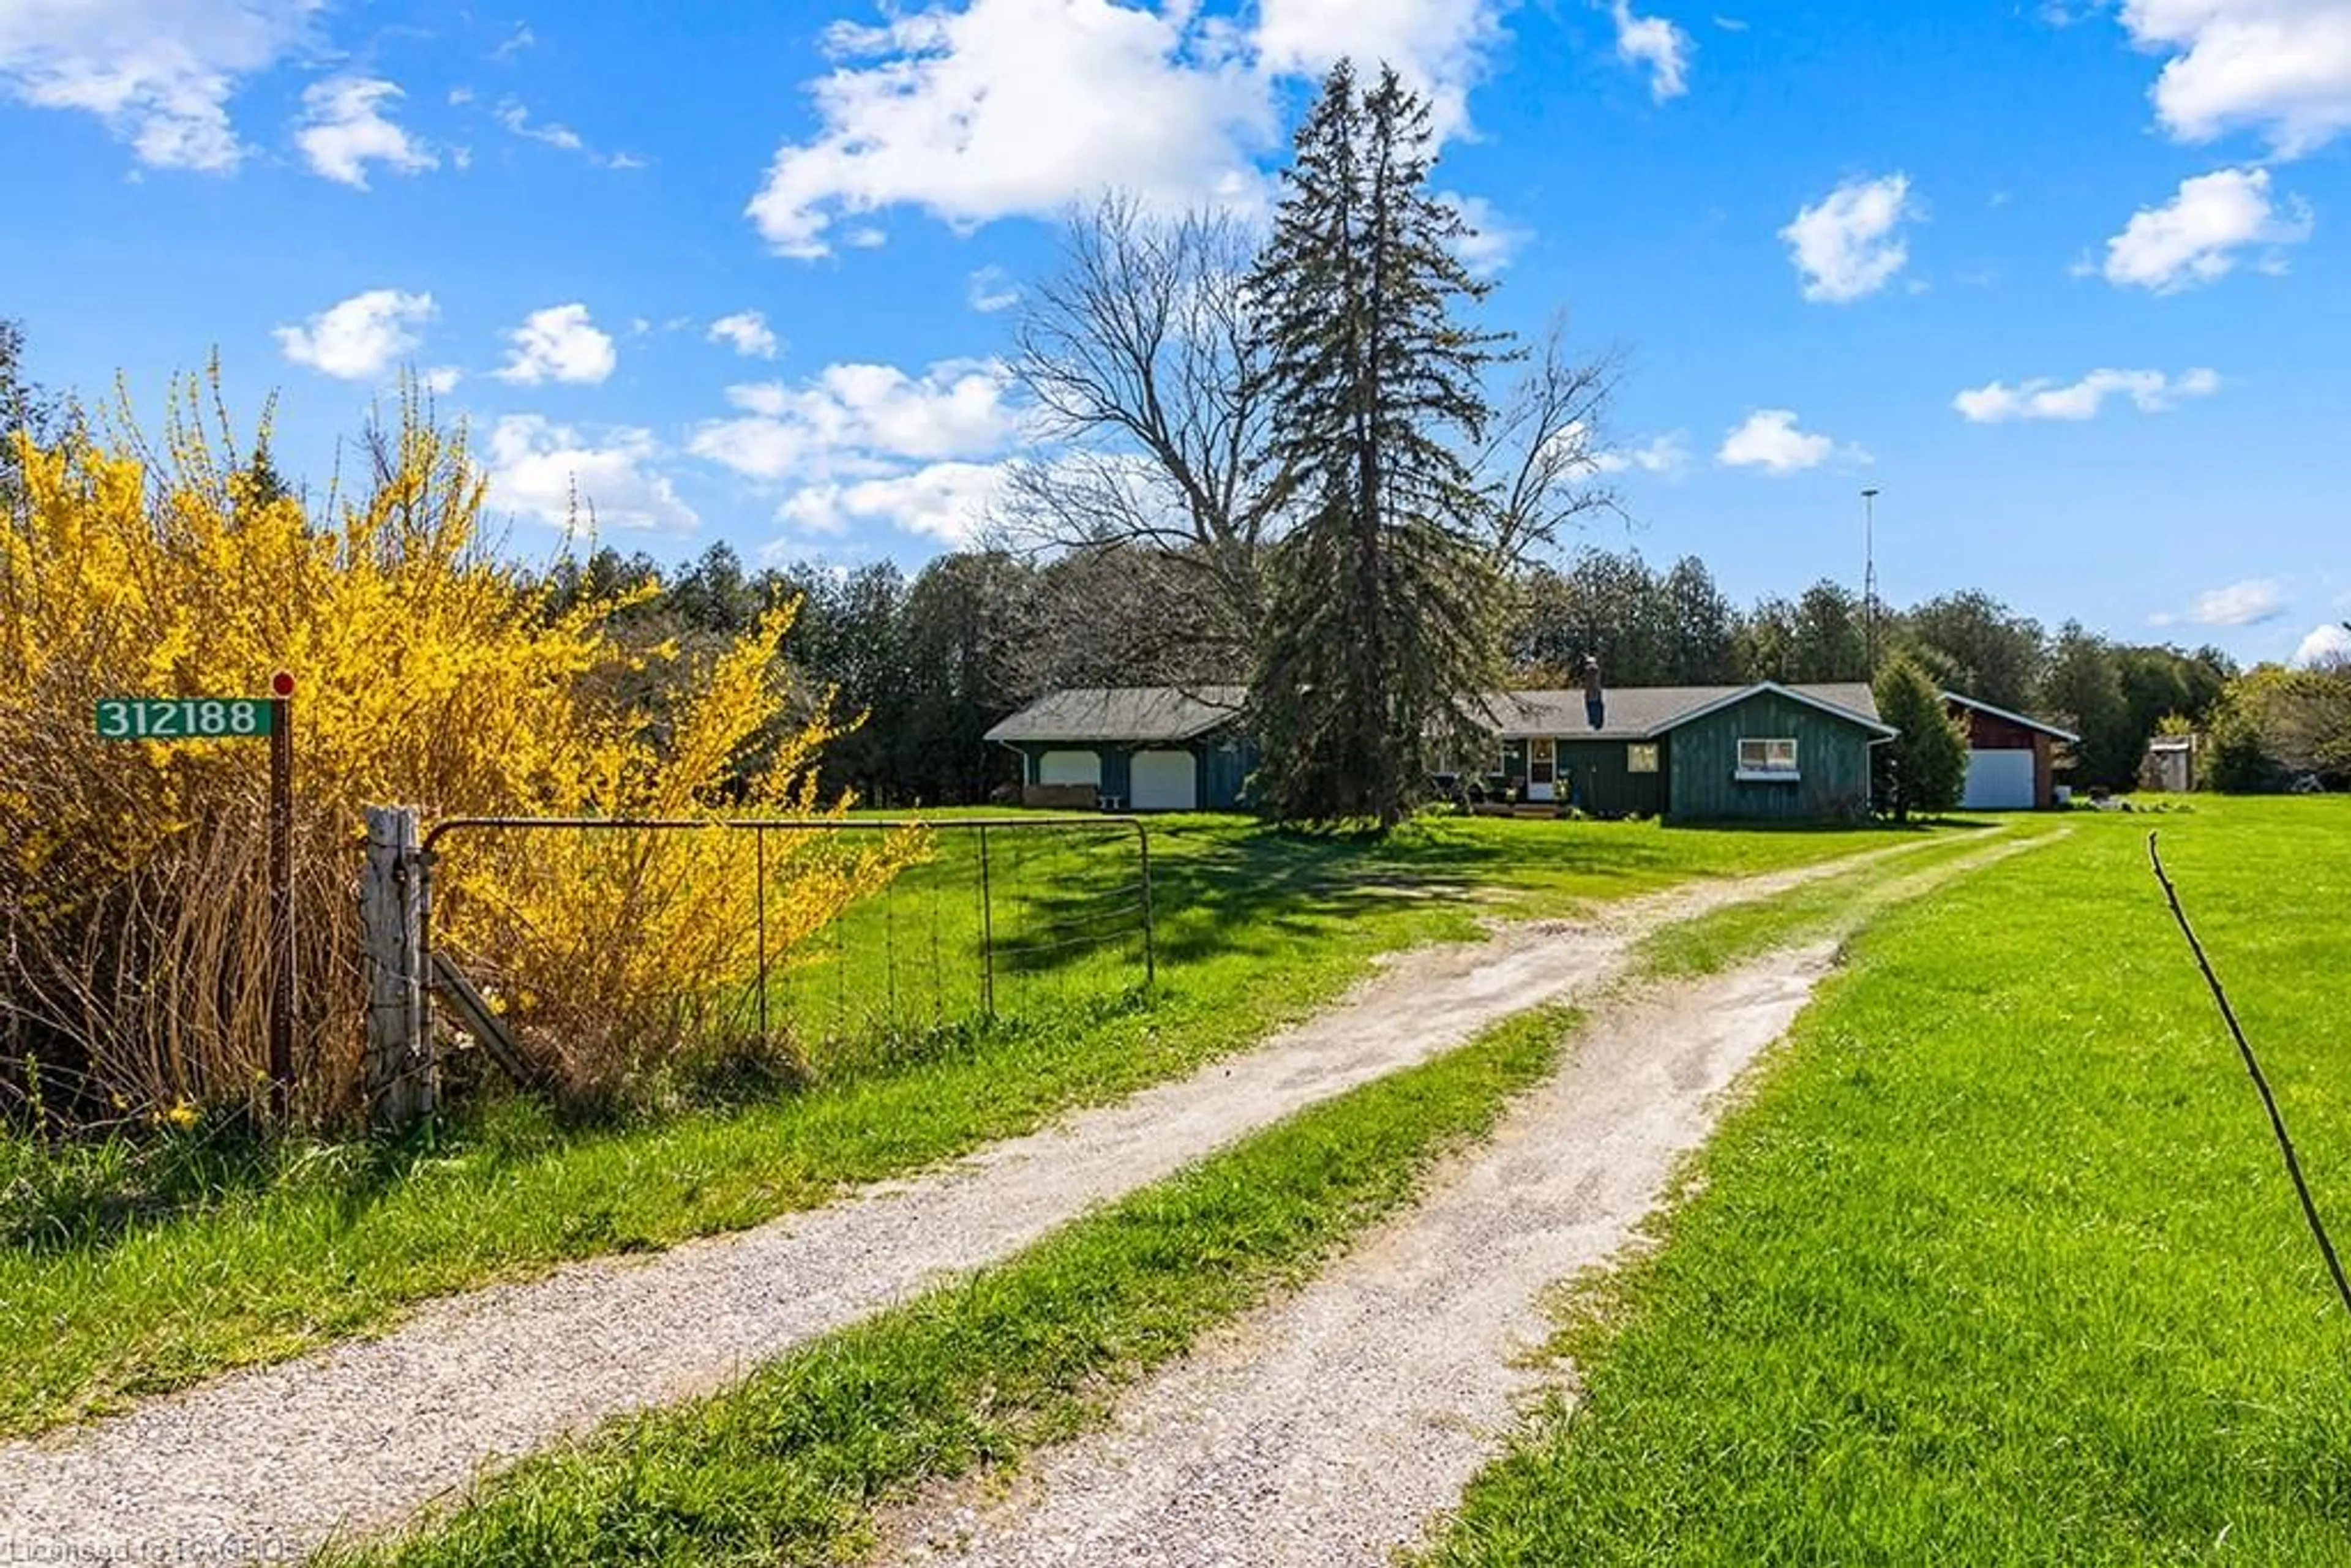 Cottage for 312188 Highway 6, West Grey Ontario N0G 1C0